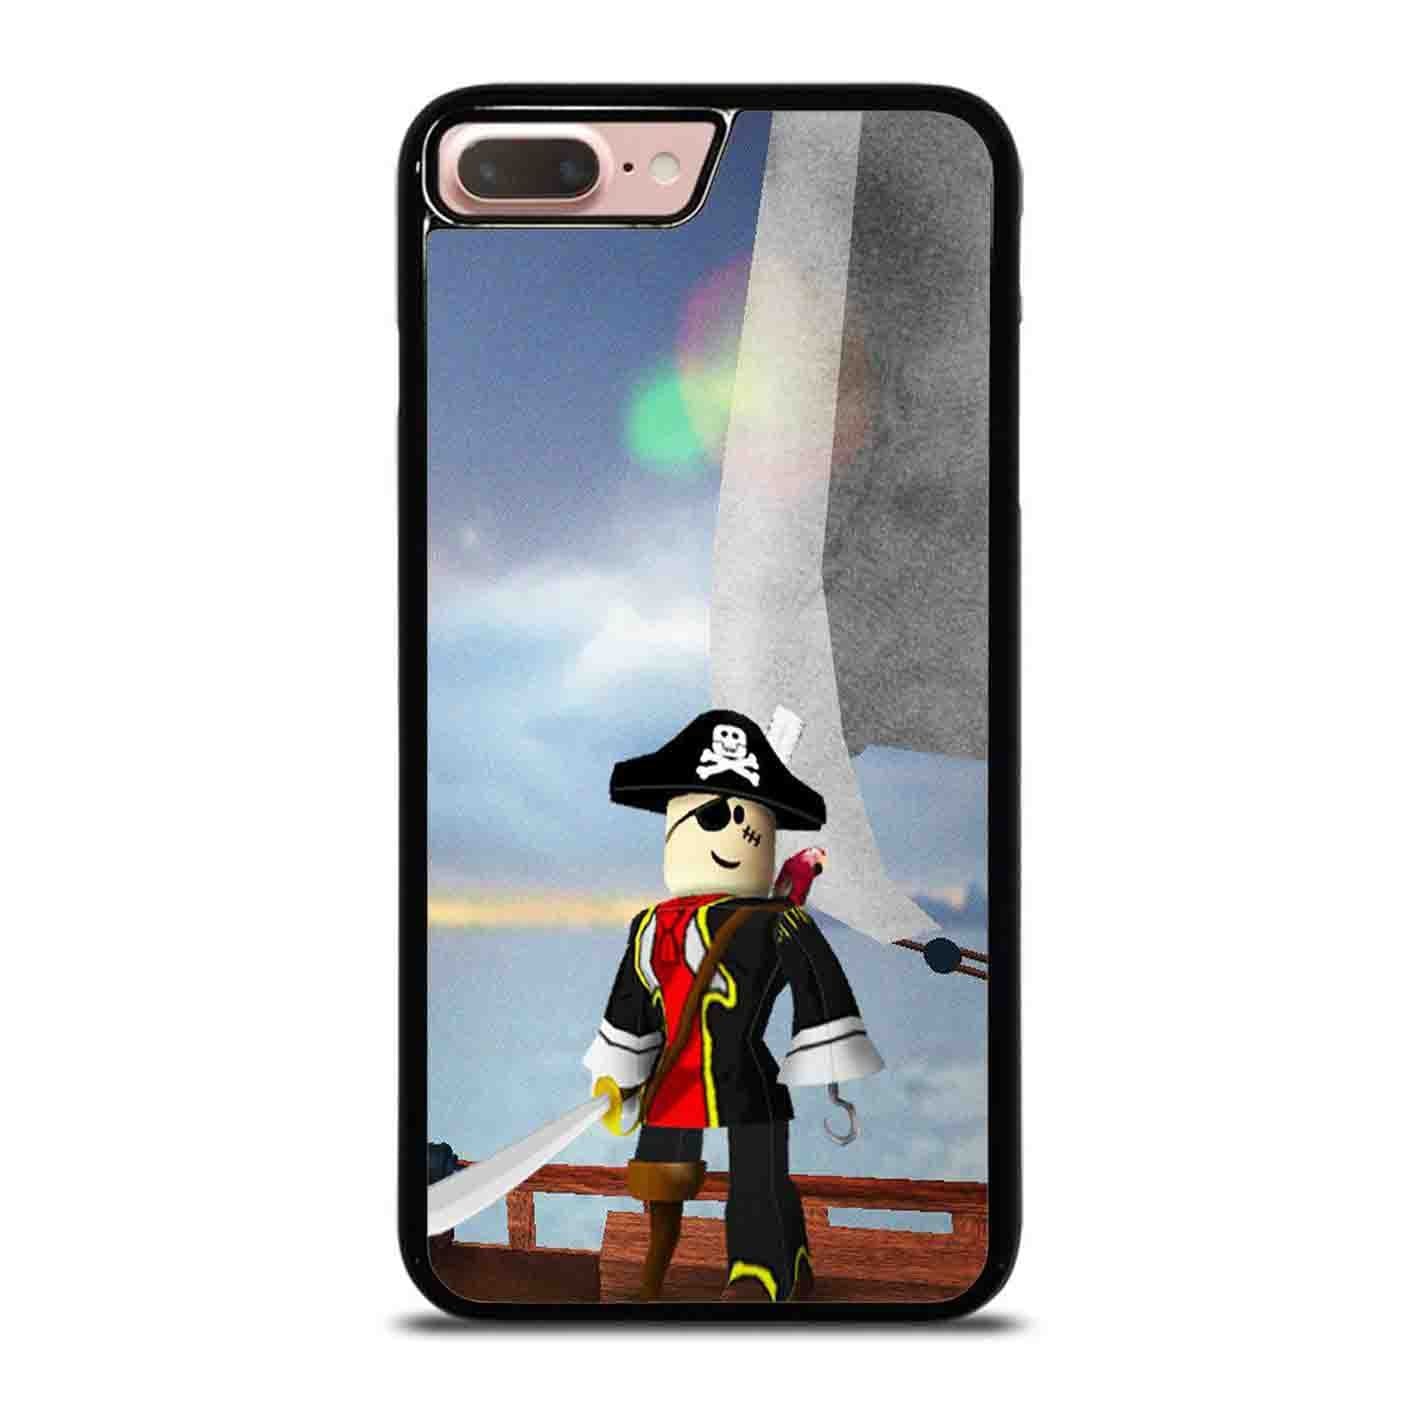 Roblox Artwork 07 Iphone 8 Plus Case Cover Iphone And Android Teecustom - roblox phone case iphone 8